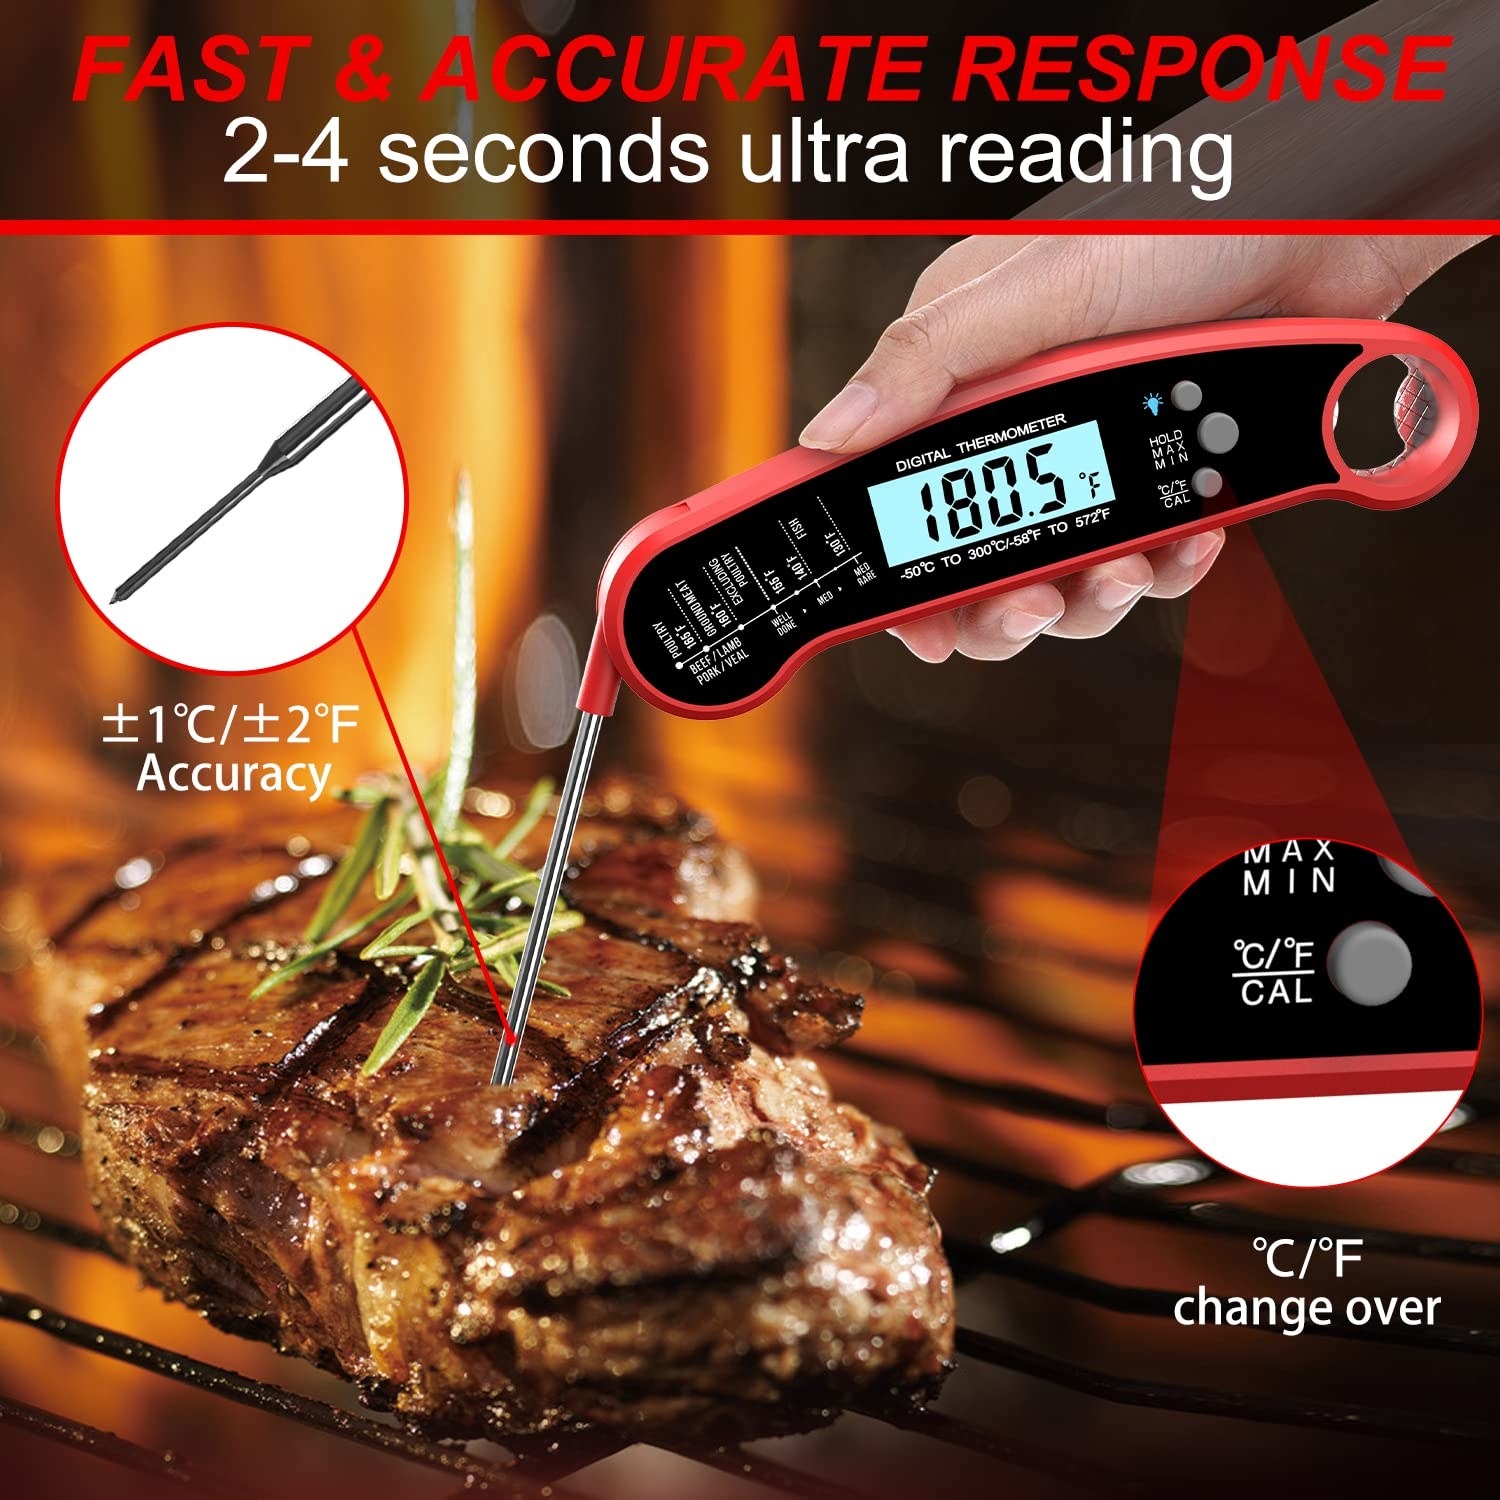 The food thermometer with probe stuck into a steak for a fast and accurate response reading in 2-4 seconds within +/- 1 degree C or 2 degrees F